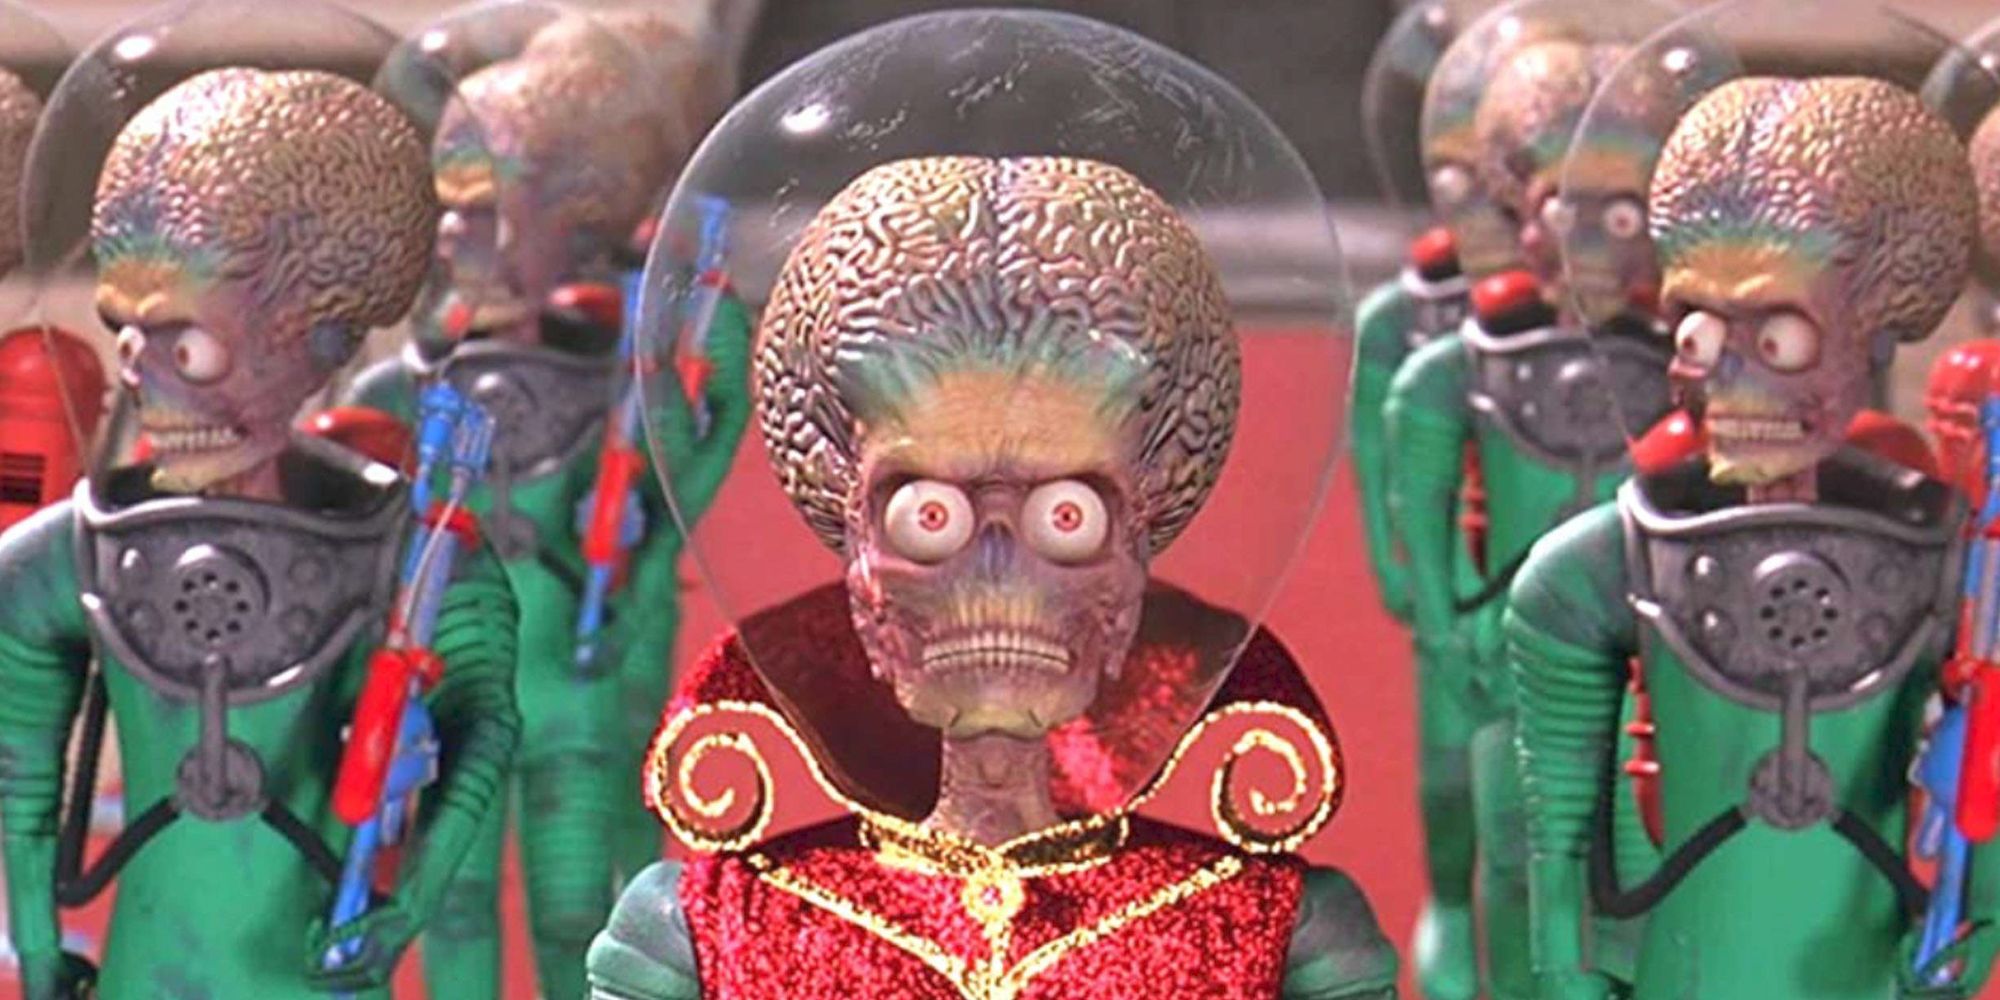 The Martian army looking angry while walking down a red carpet in Mars Attacks!